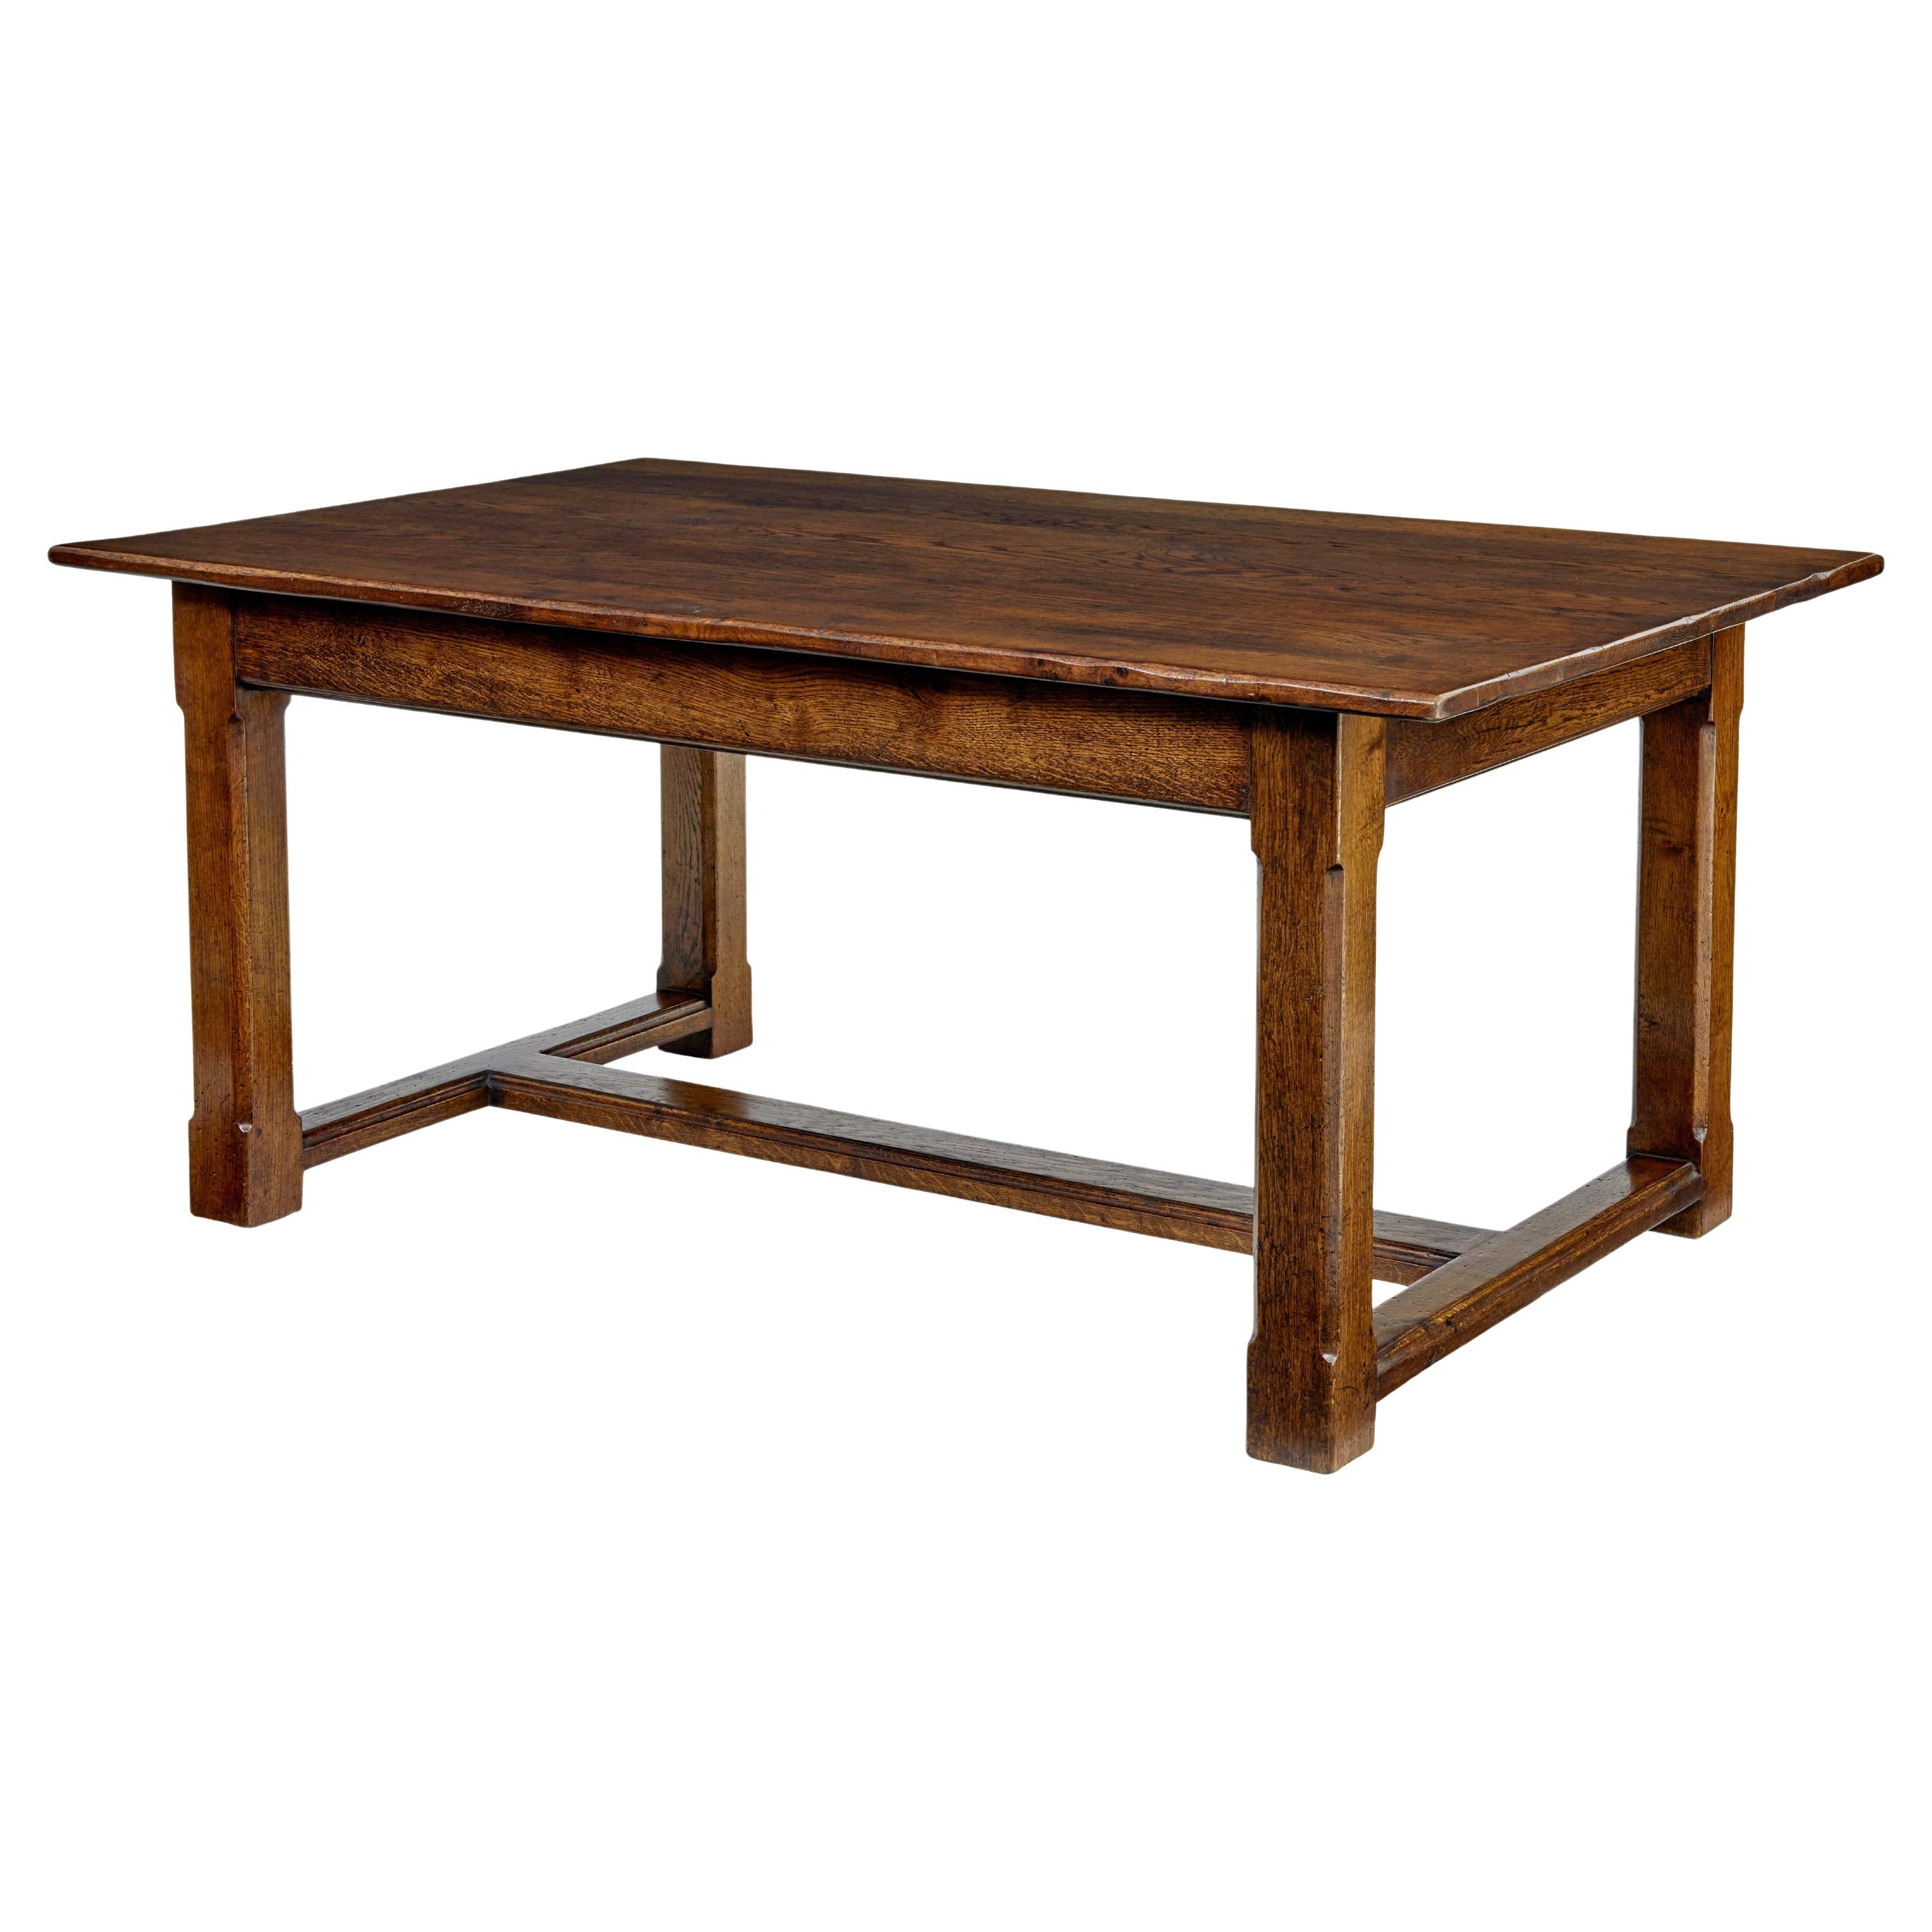 Late 20th century solid oak refectory table For Sale